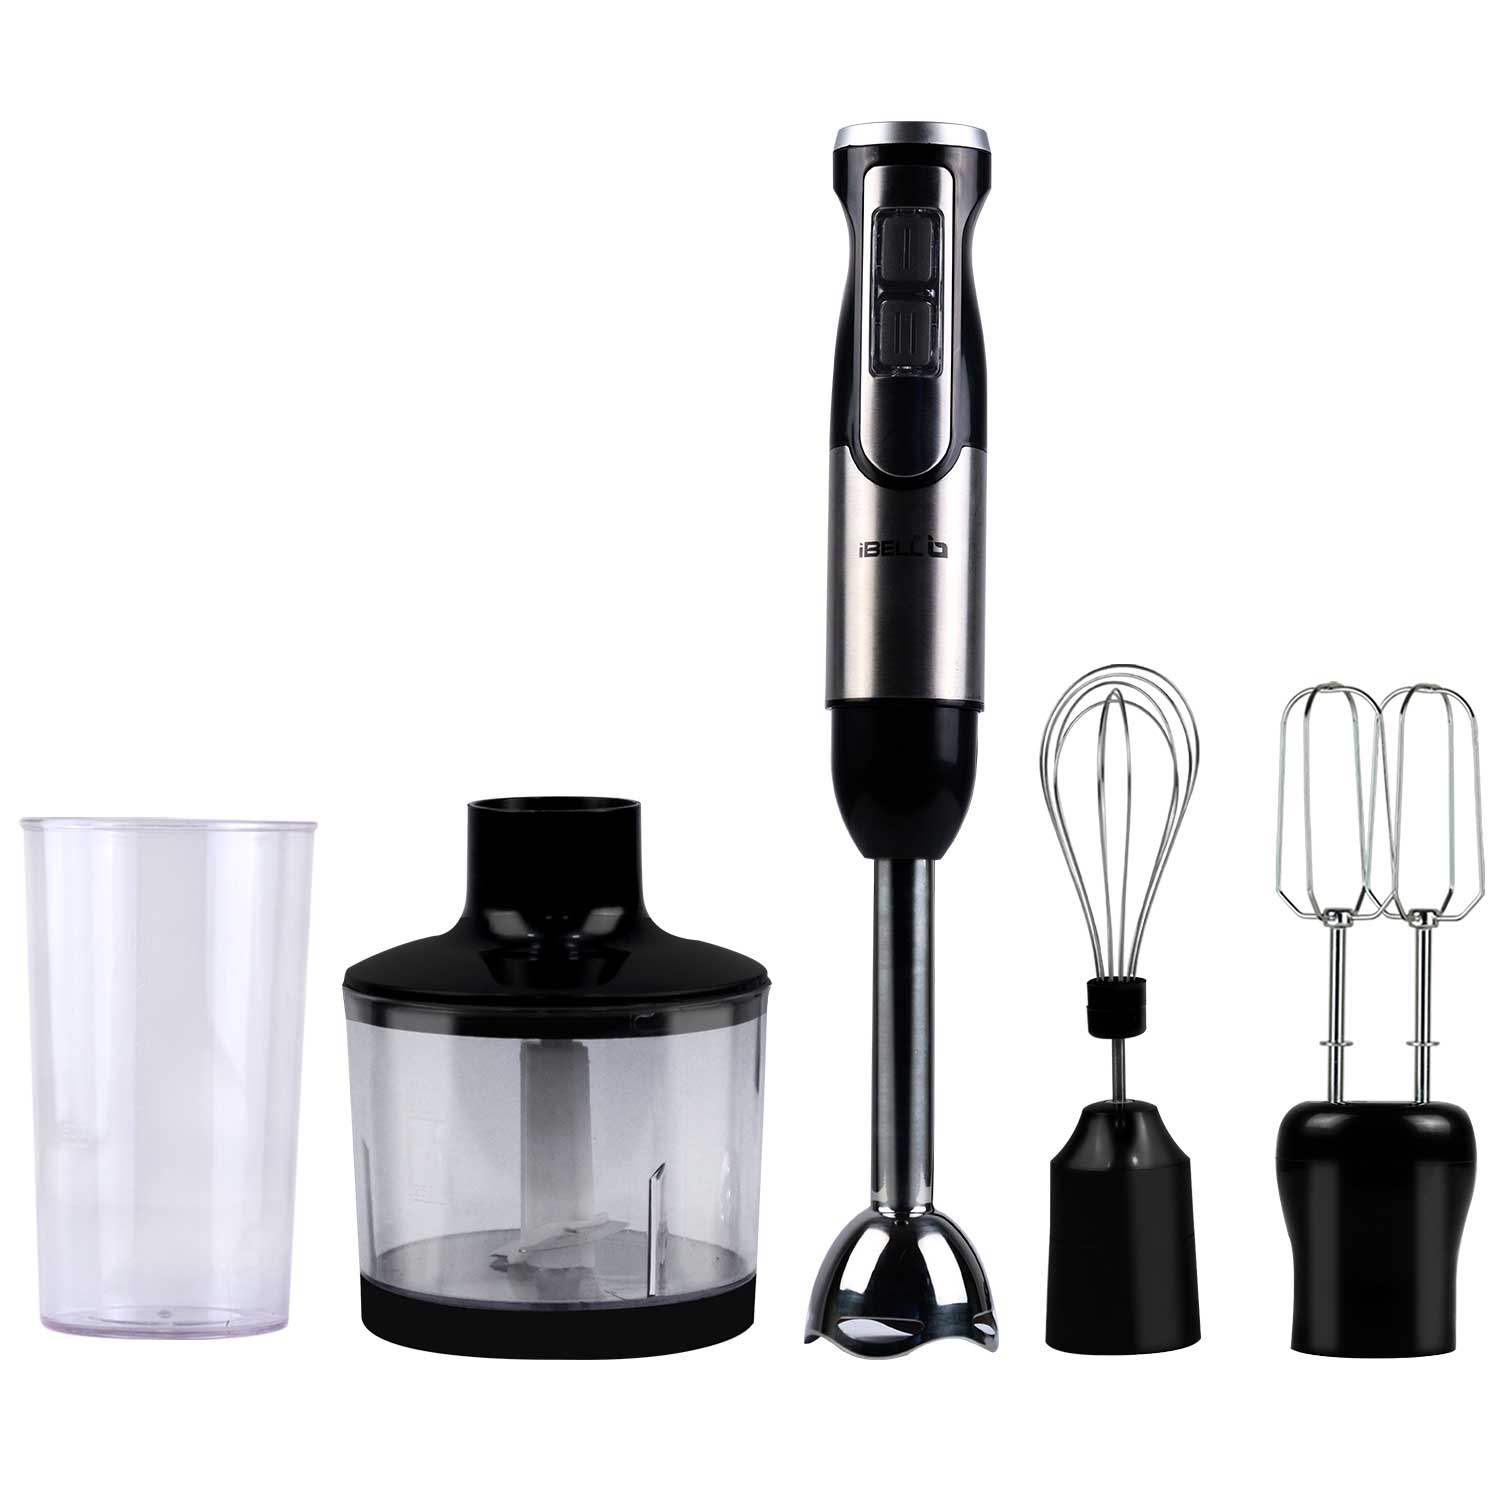 Ibell hb1000j 1000w 5 in 1 hand mixer with whisker beater blender ...